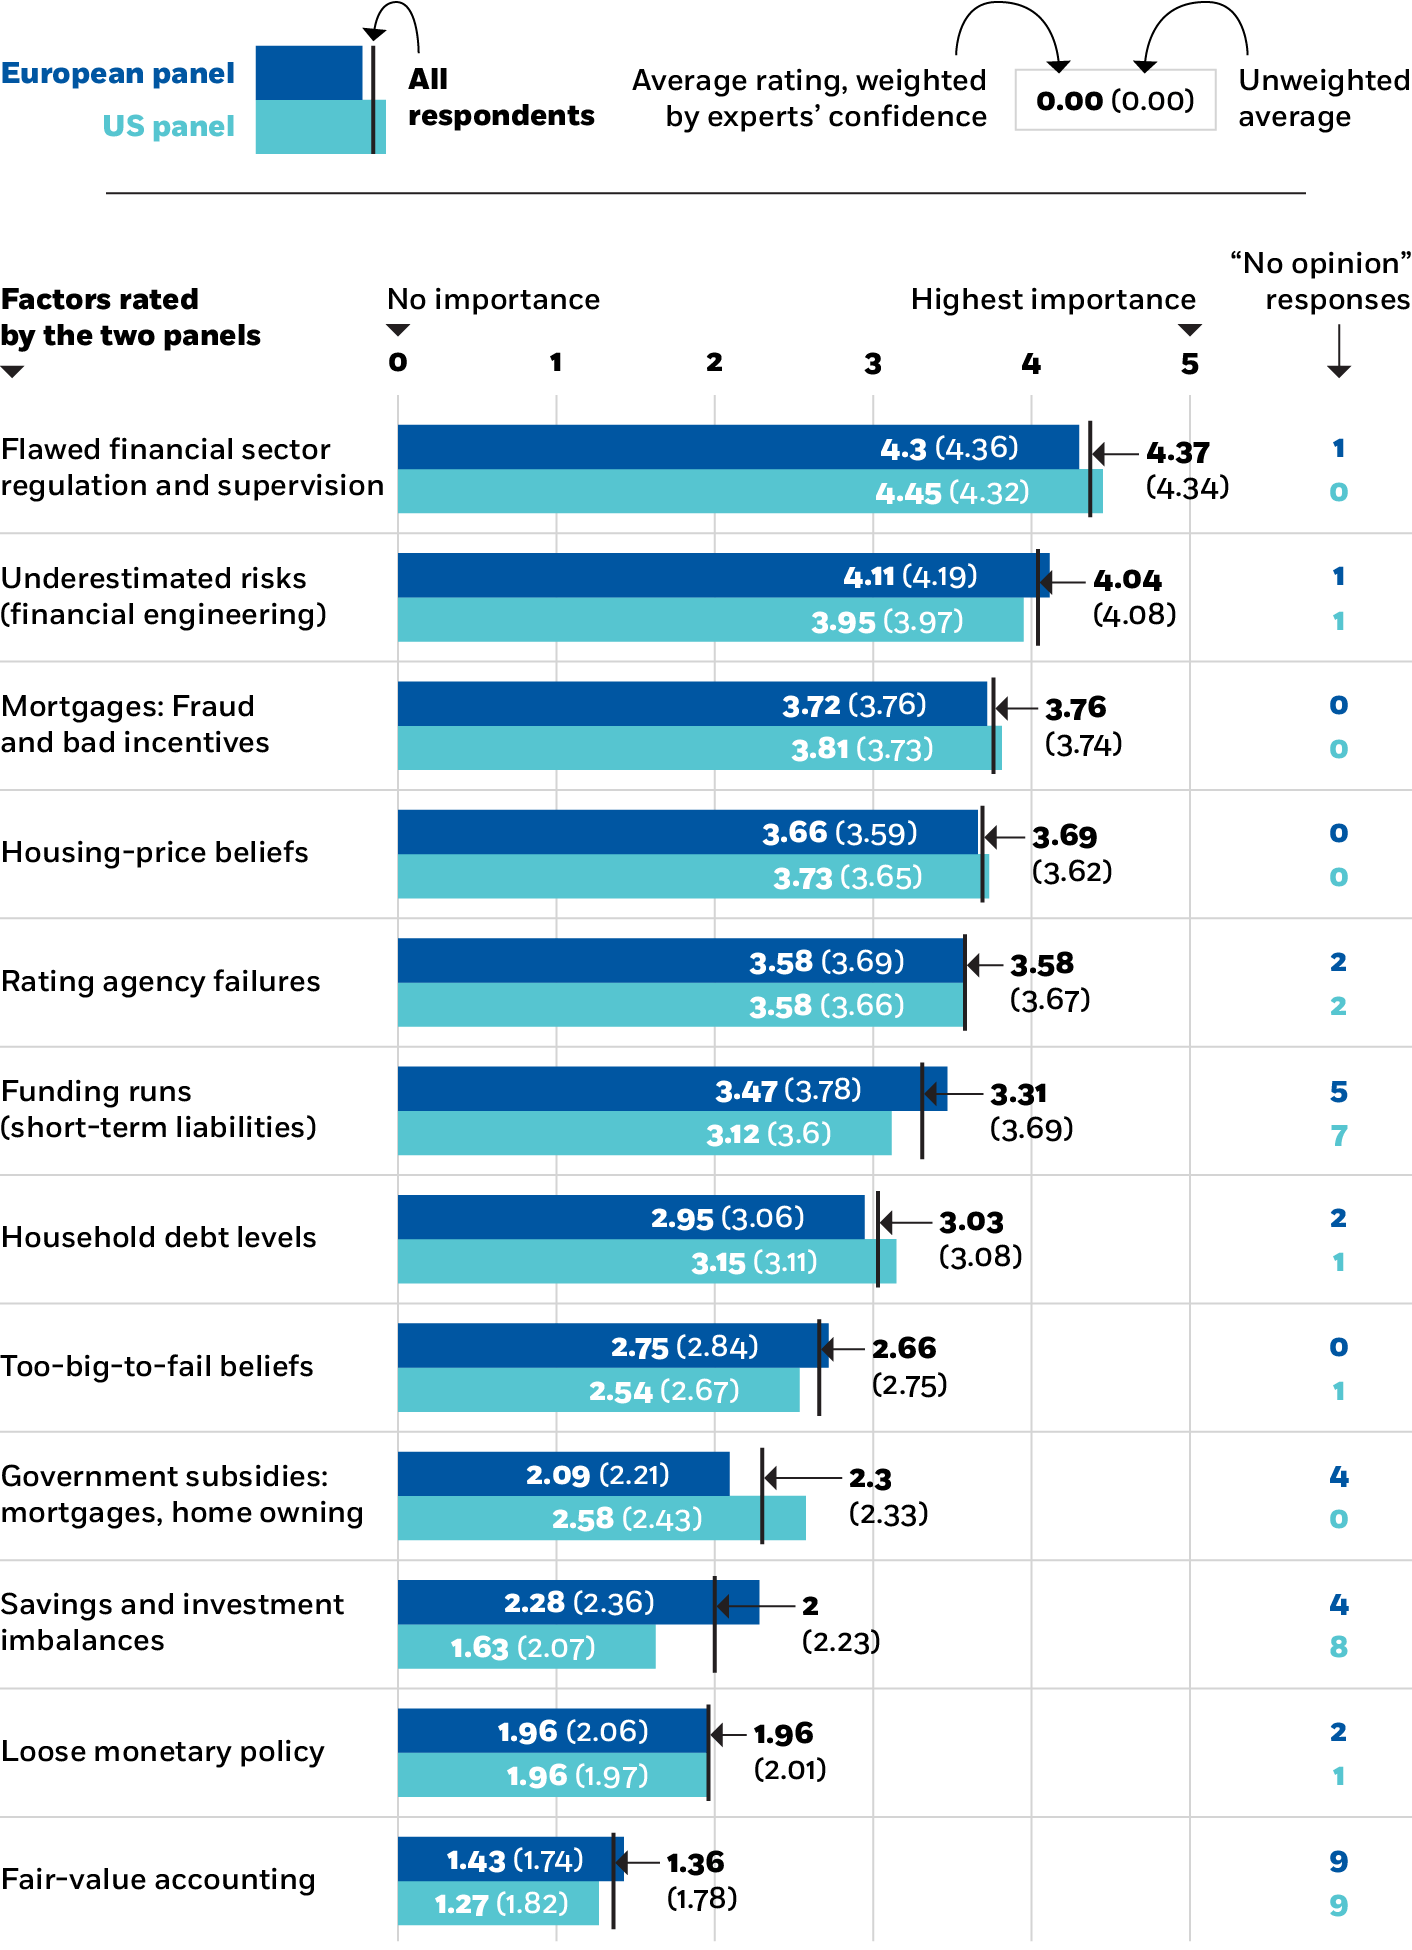 A bar chart ranking the twelve factors according to the average rating that the European and US panels gave them on a zero to five scale, with five being the highest importance. The leading factor for both panels with an average of four-point-three-seven was flawed financial sector regulation and supervision. The remaining eleven factors ranged from four-point-zero-four to one-point-three-six: underestimated risks related to financial engineering; mortgage fraud and bad incentives; housing-price beliefs; rating agency failures; short-term liabilities related to funding runs; household debt levels; too-big-to-fail beliefs; government subsidies related to mortgages and home owning; savings and investment imbalances; loose monetary policy; and fair-value accounting. 